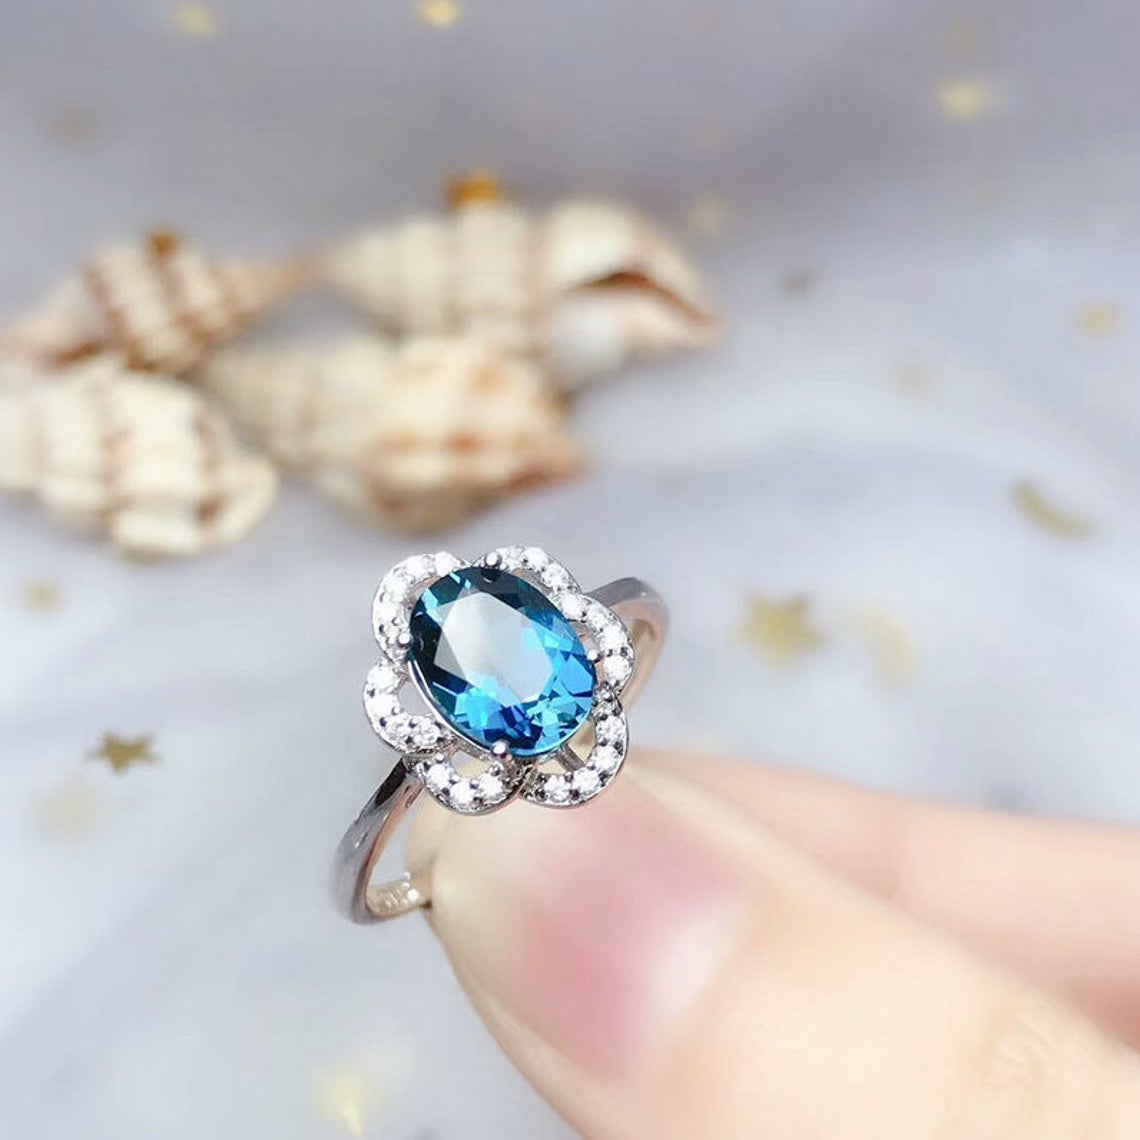 Natural London Blue Topaz Ring, White Gold Plated Silver Ring, November Birthstone, Engagement Cockt